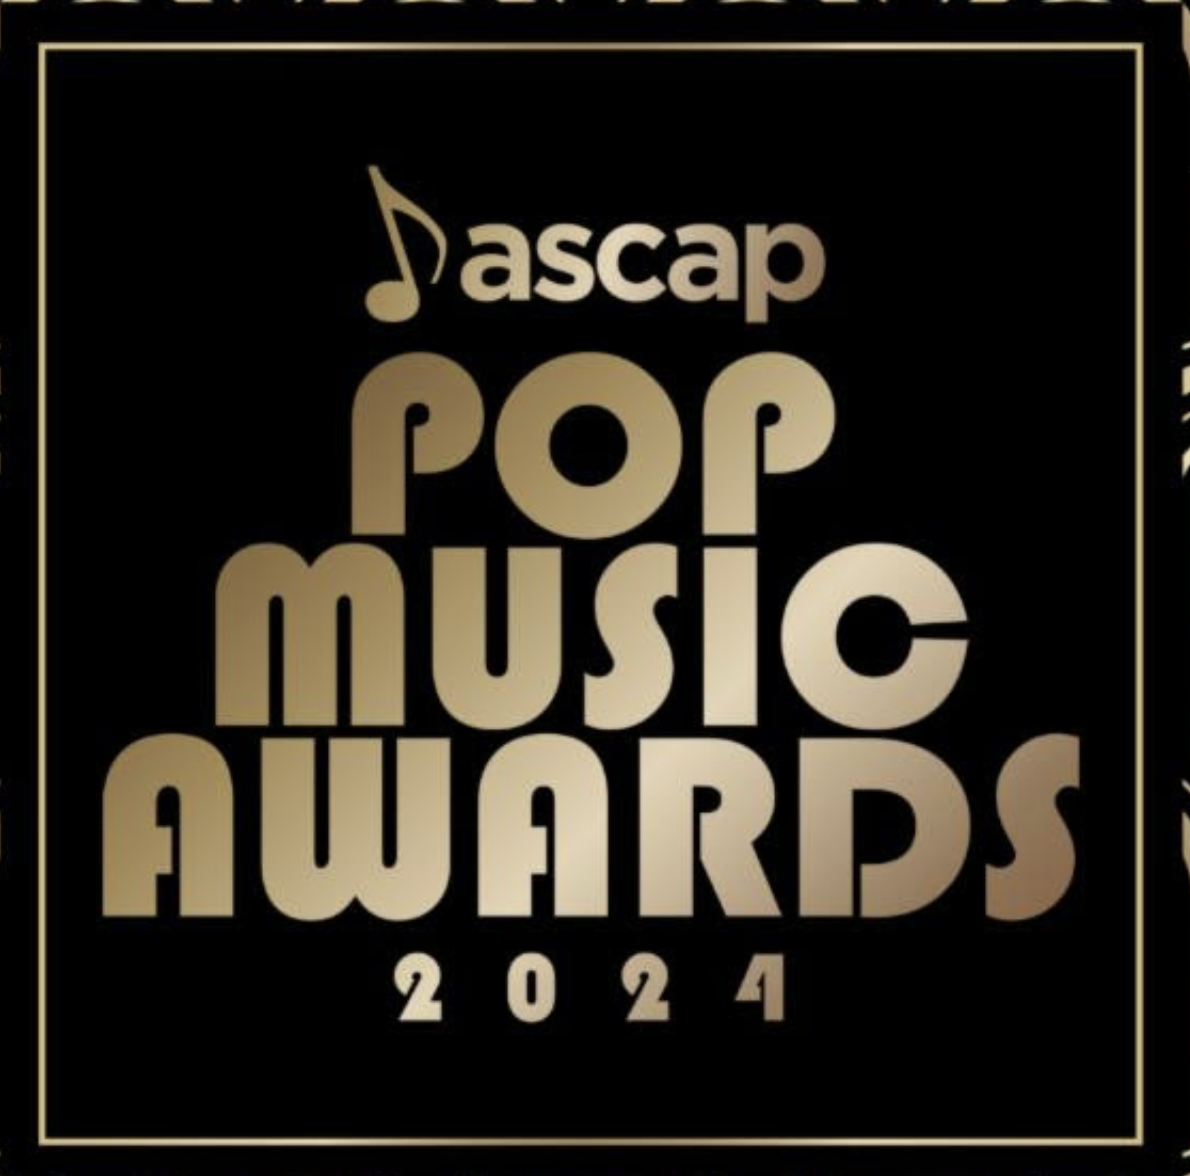 41st Annual ASCAP Pop Music Awards Winners Include Songwriters Of The Year Olivia Rodrigo and Daniel Nigro, Song Of The Year “Calm Down”